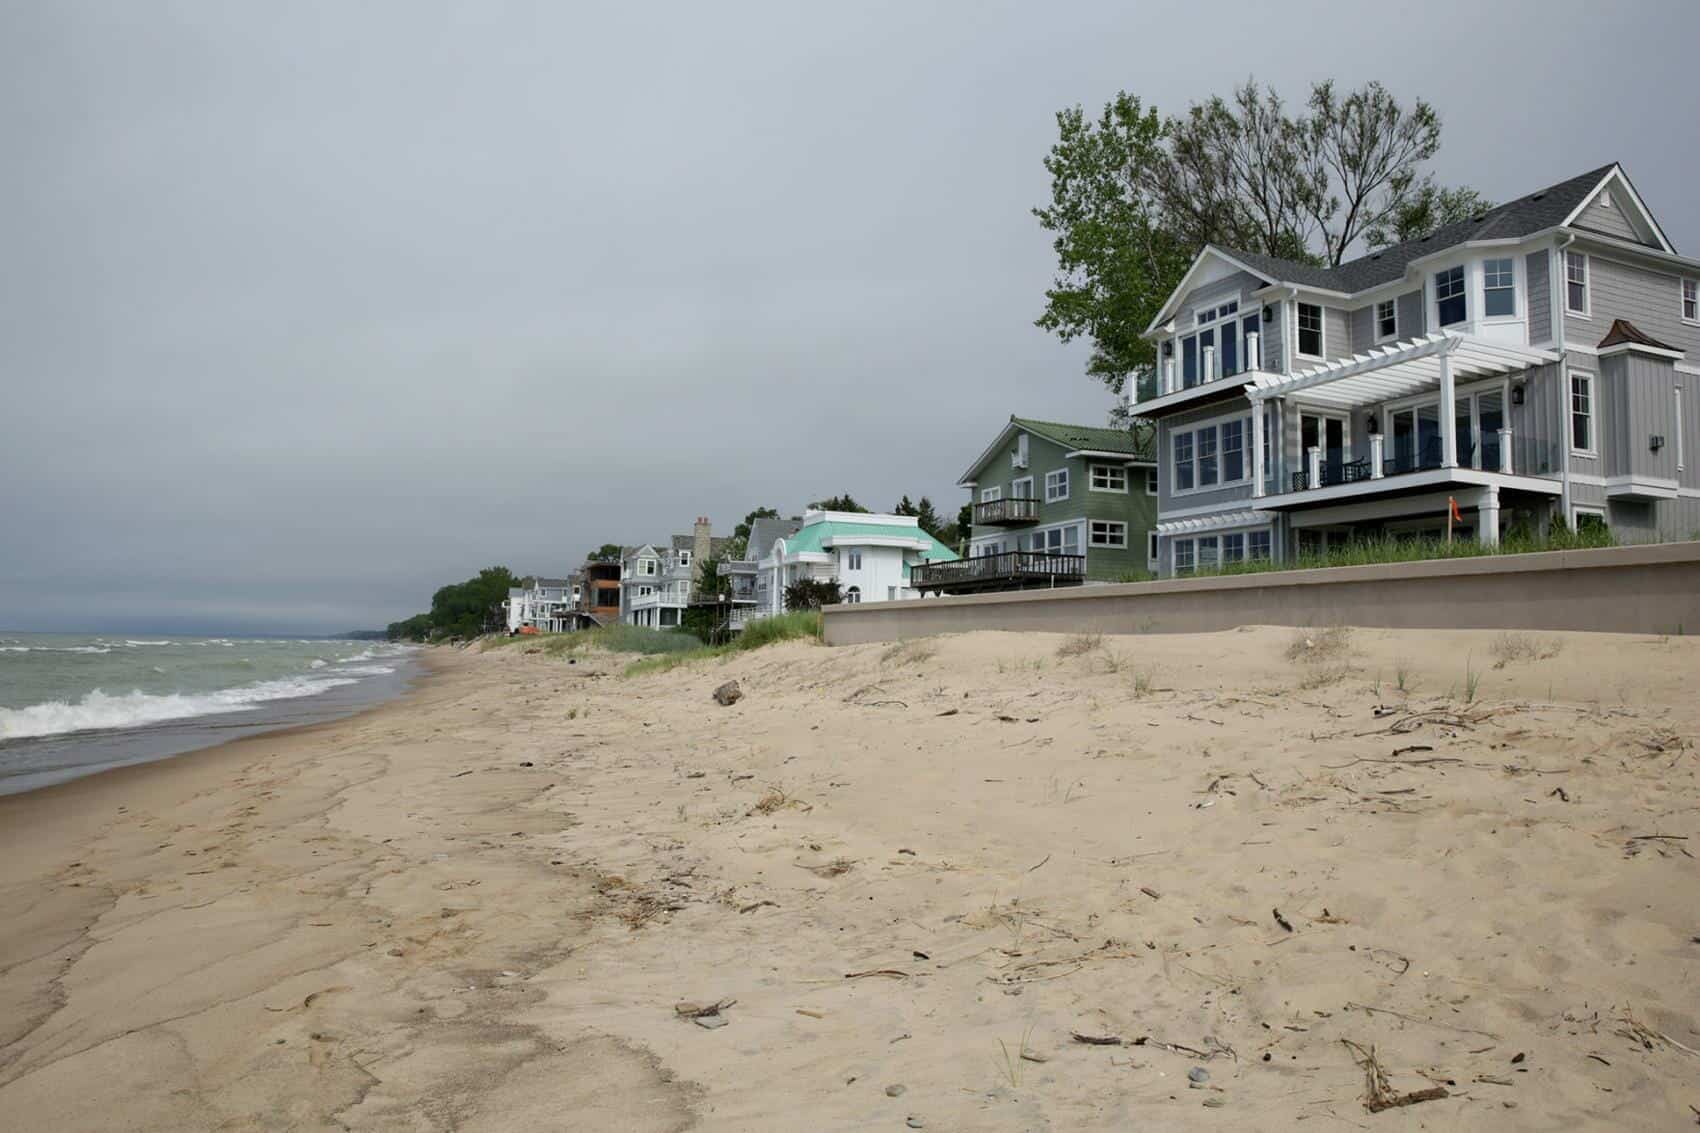 photo: public beach access protected by high court in Indiana